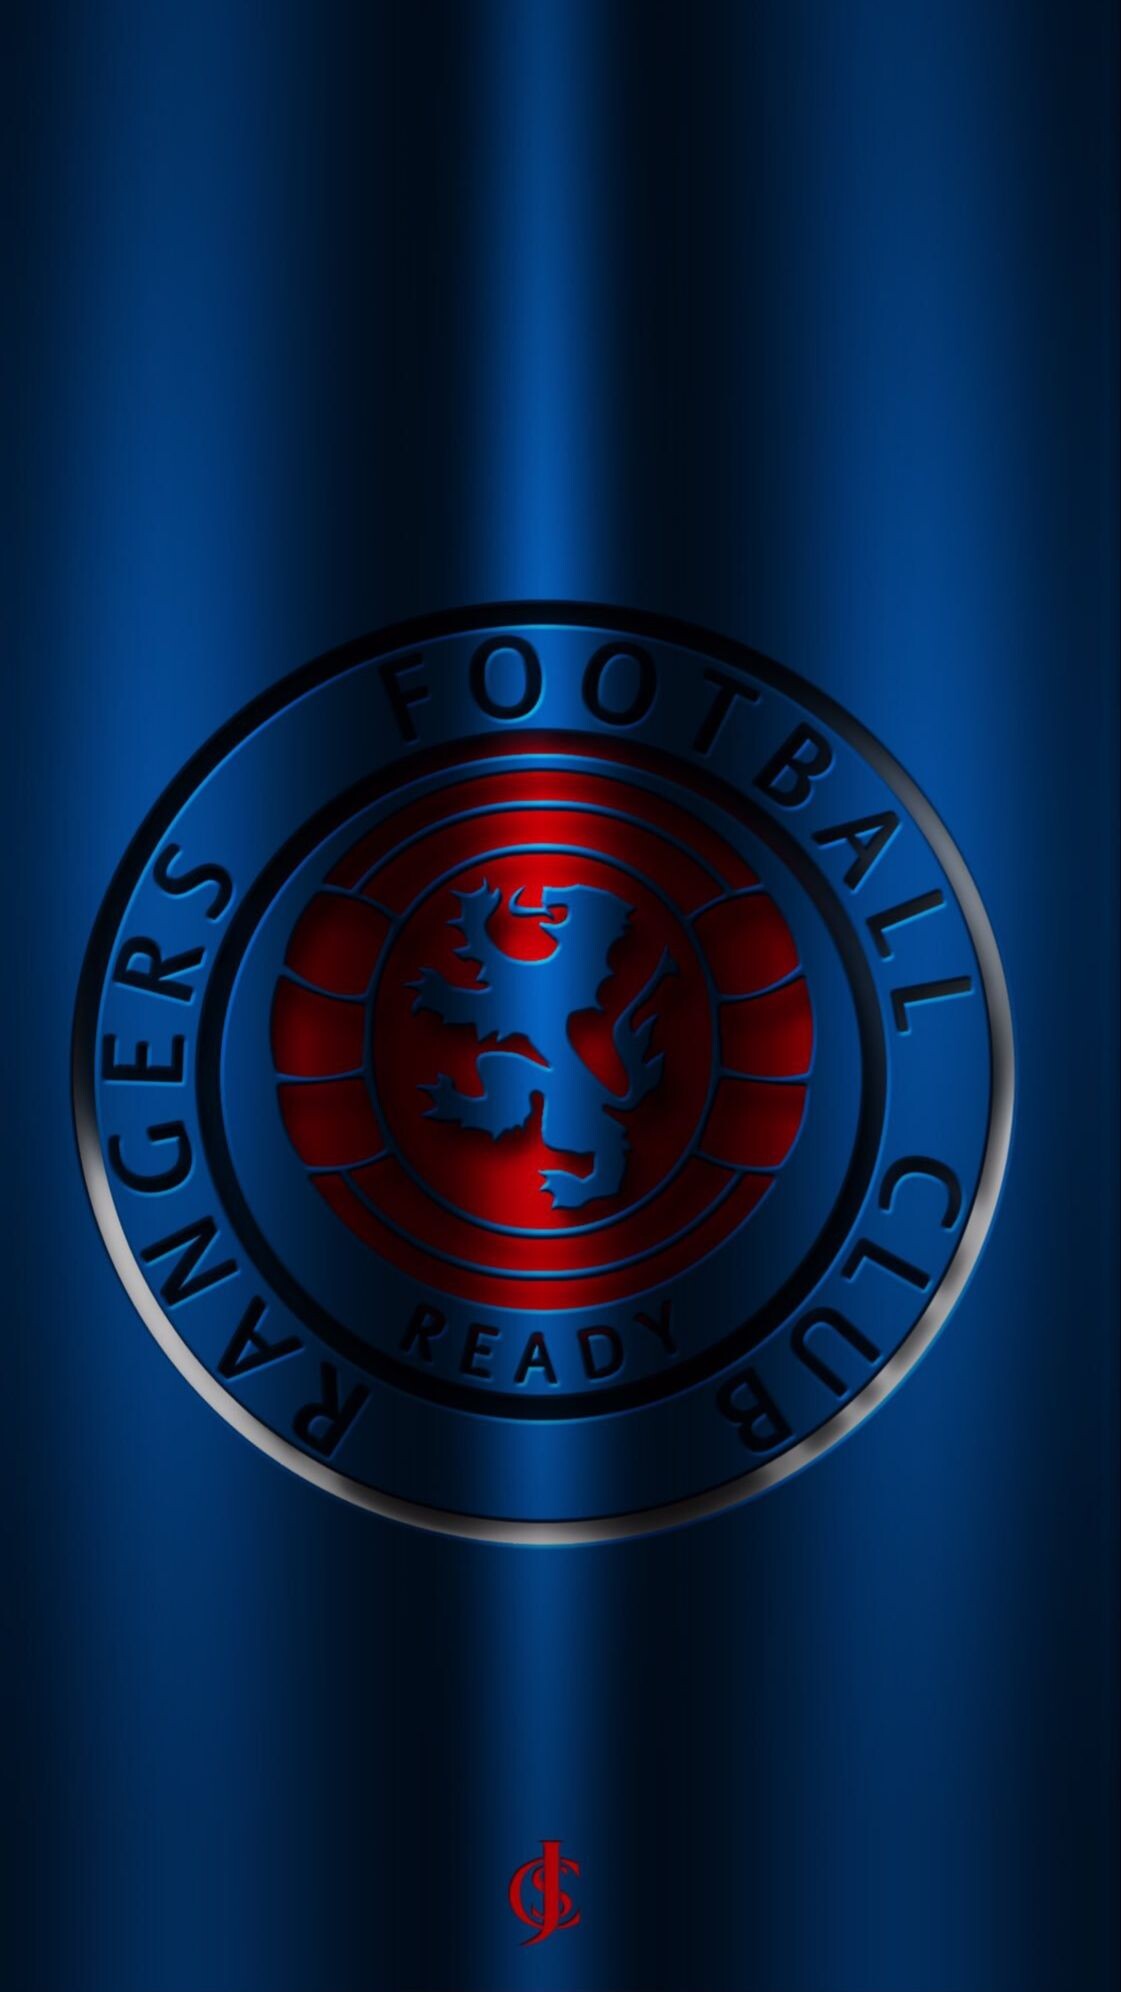 Rangers F.C.: The club that has won the Scottish League title 55 times, The Gers. 1130x2000 HD Background.